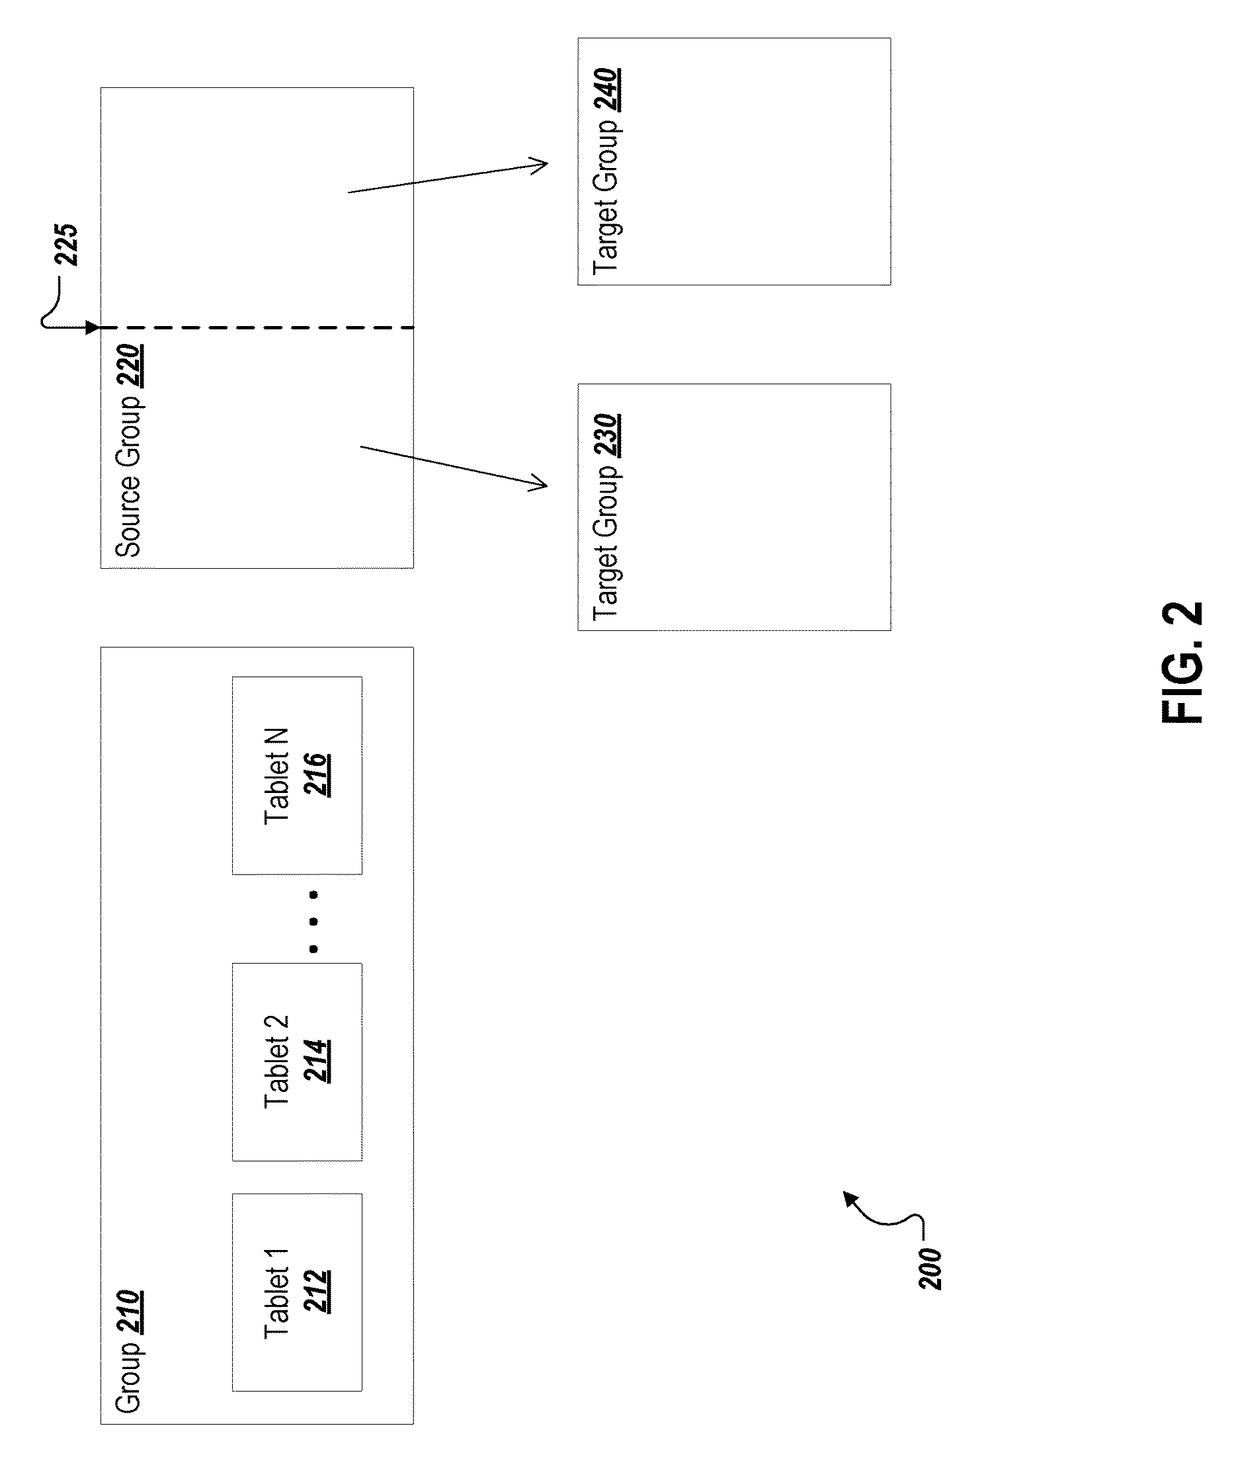 Splitting and moving ranges in a distributed system